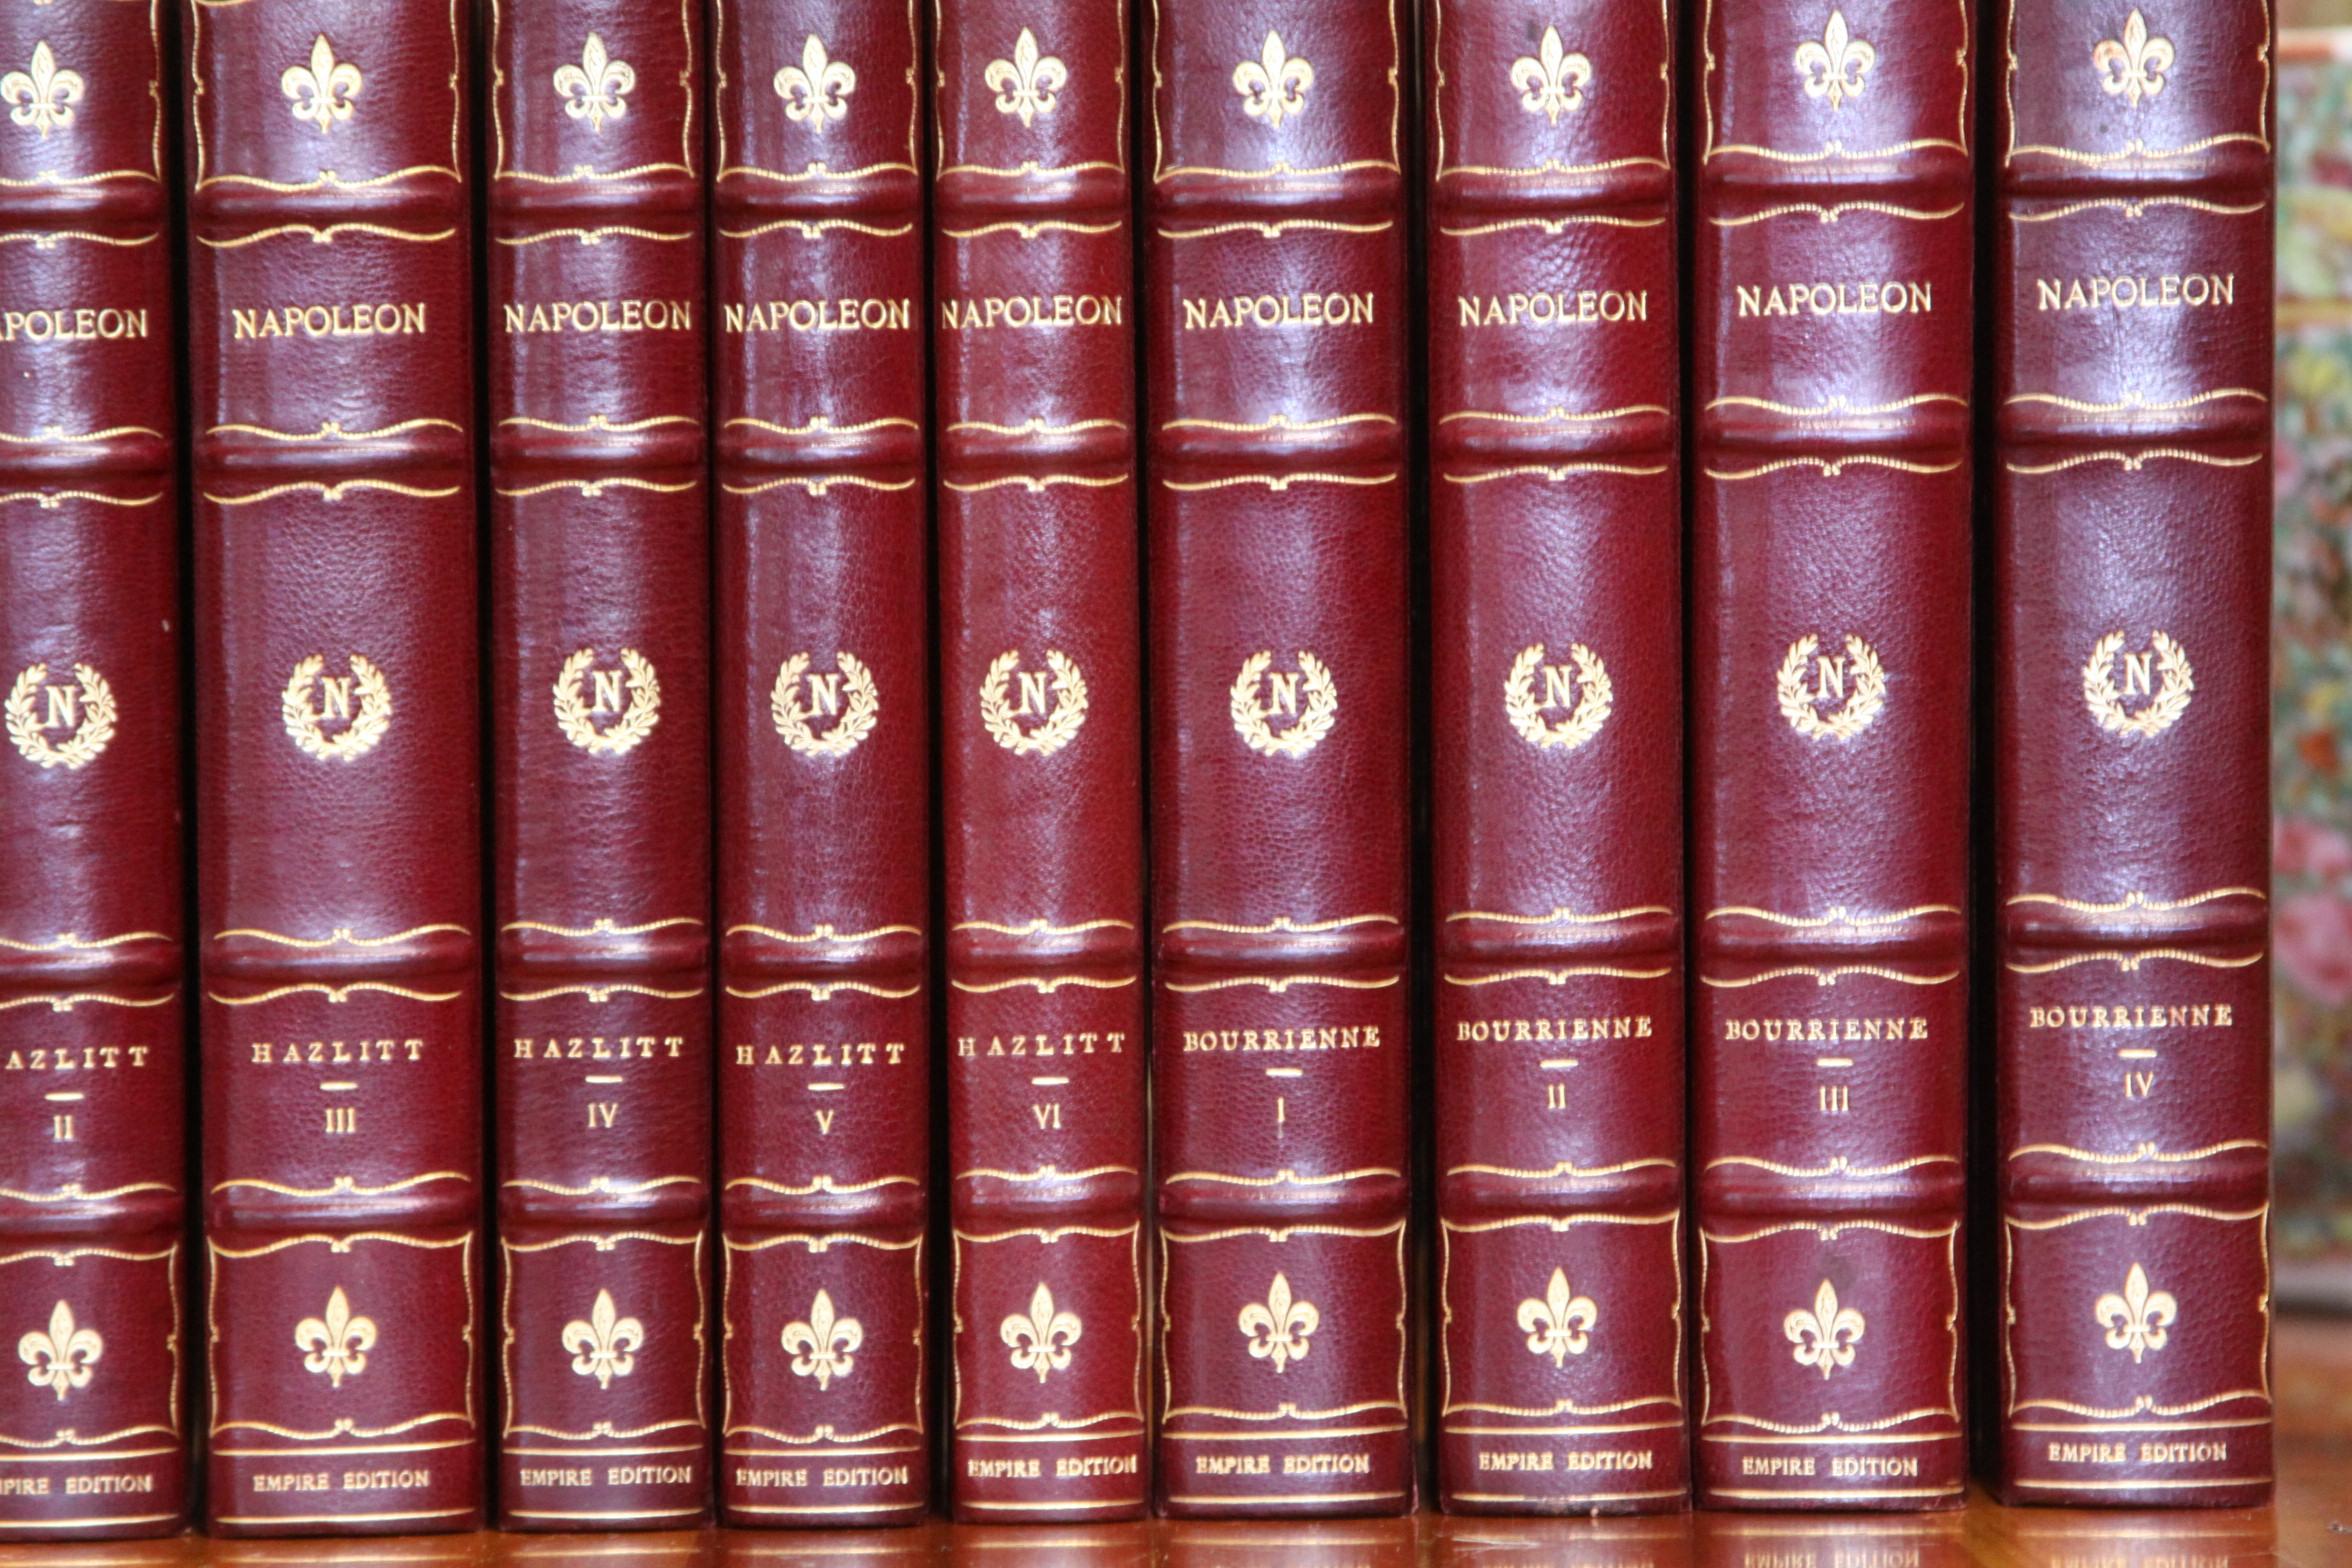 16 volumes . Published: New York, The Grolier's Society, 1900s. The Life of Napoleon Bonaparte with Memoirs Madame Junot, and Memoirs of Napoleon Bonaparte by Bourrienne, Hazlitt, and Junot. The Empire Edition is limited to four hundred and